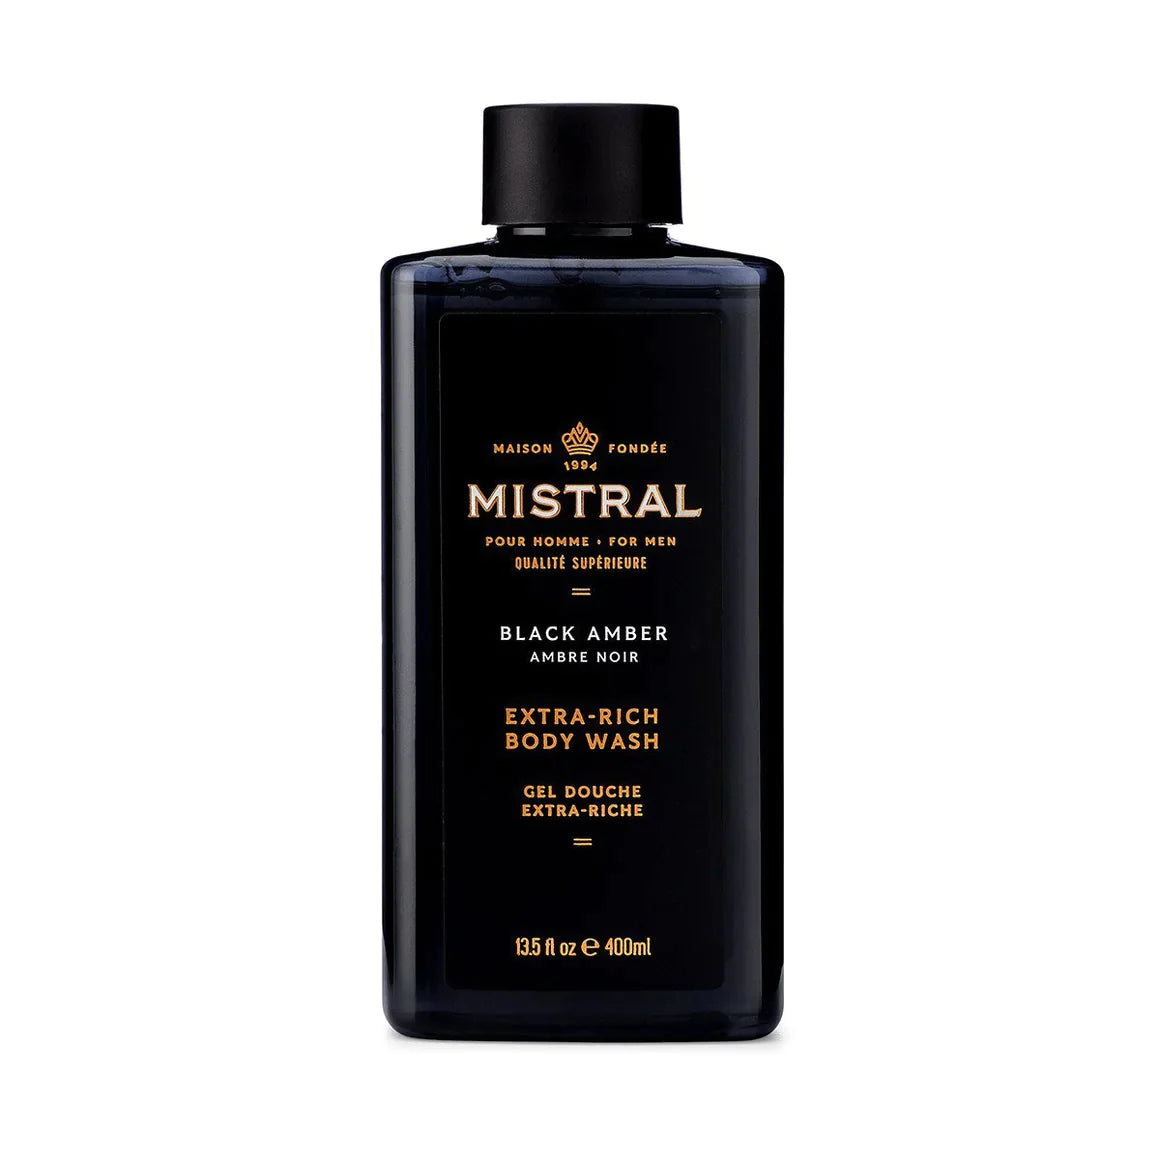 Mistral - Body Wash - 400ml-Men's Accessories-Black Amber-Yaletown-Vancouver-Surrey-Canada